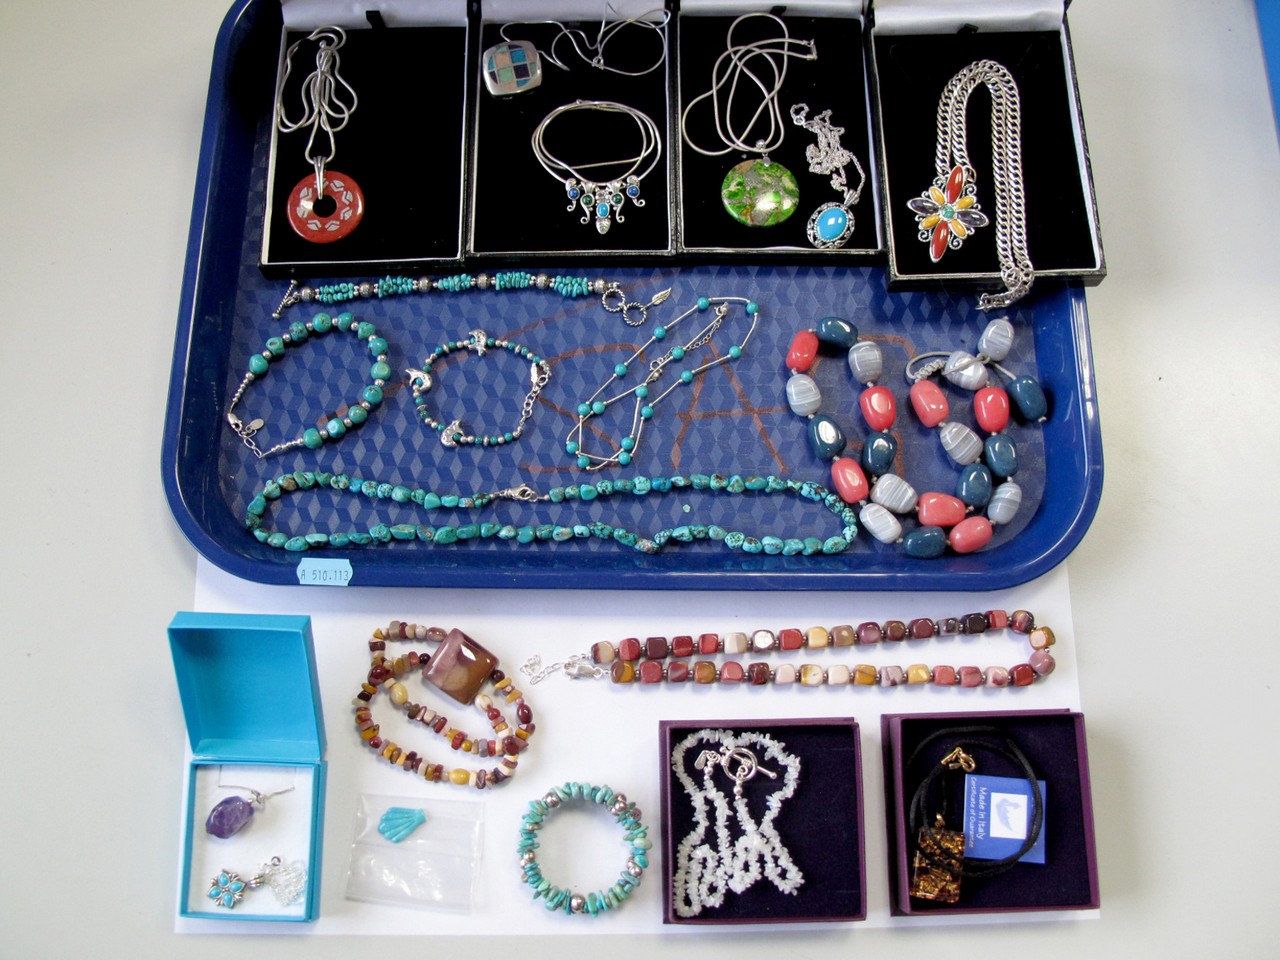 Jewellery - A Collection of Turquoise and Other Bead Bracelets, similar necklaces, pendants